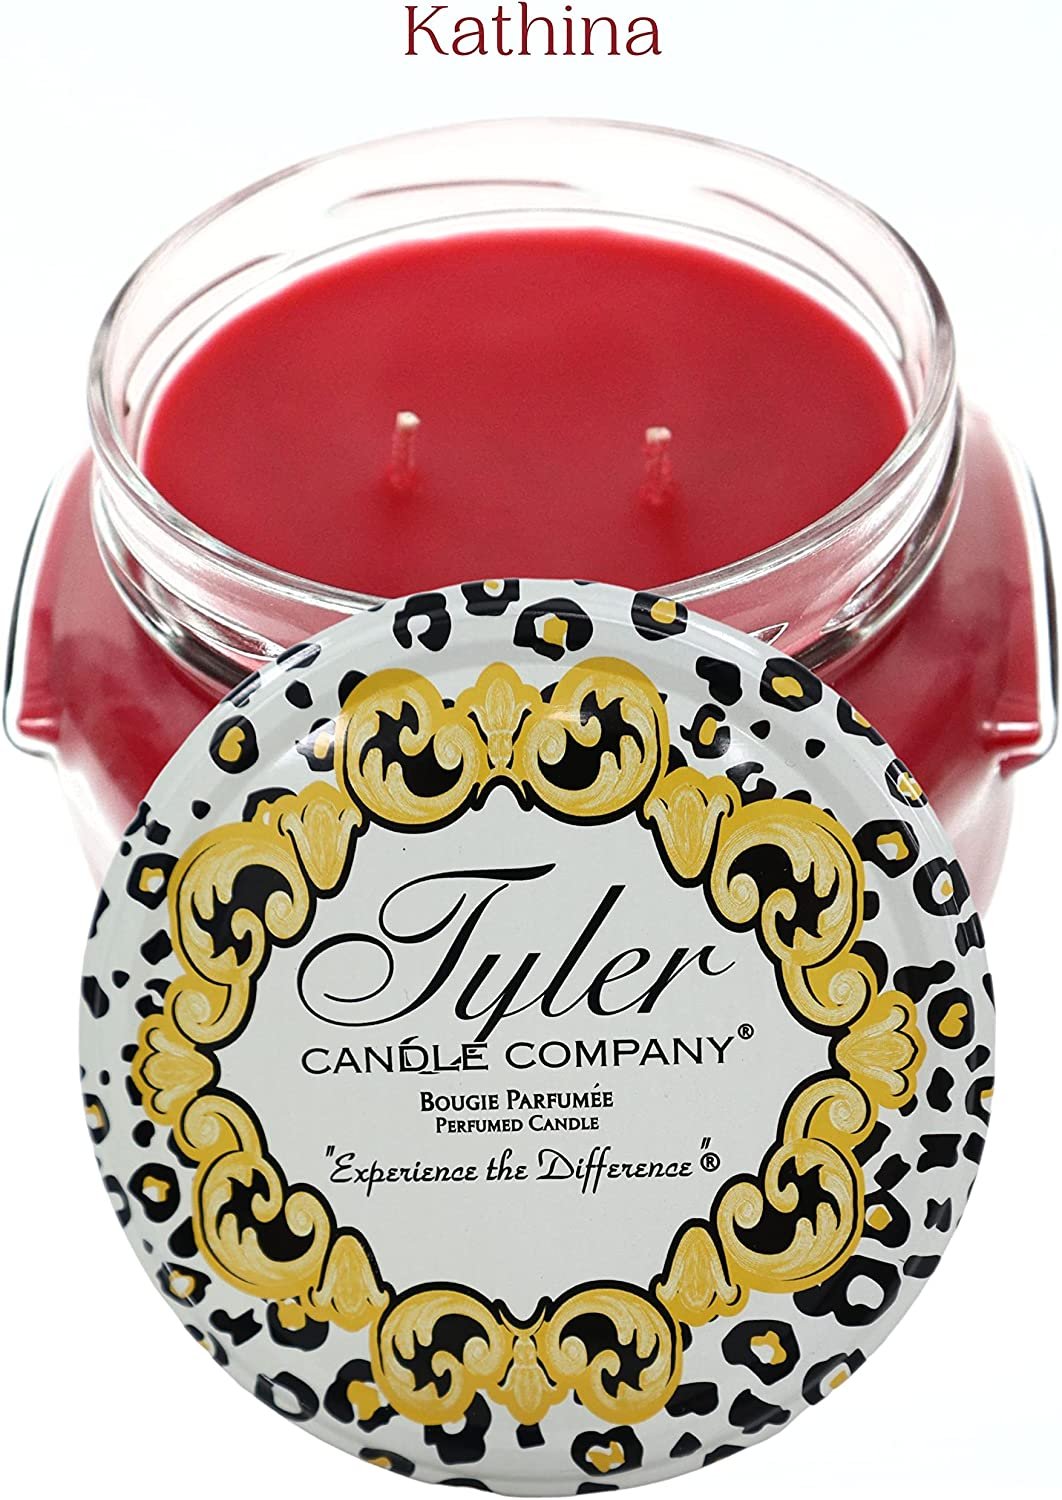 Tyler Candle Company, Kathina Jar Candle, Scented Candles Gifts for Women, Ultimate Aromatherapy Experience, Luxurious Candles with Essential Oils, Long-Lasting Burn, Large Candle 22oz